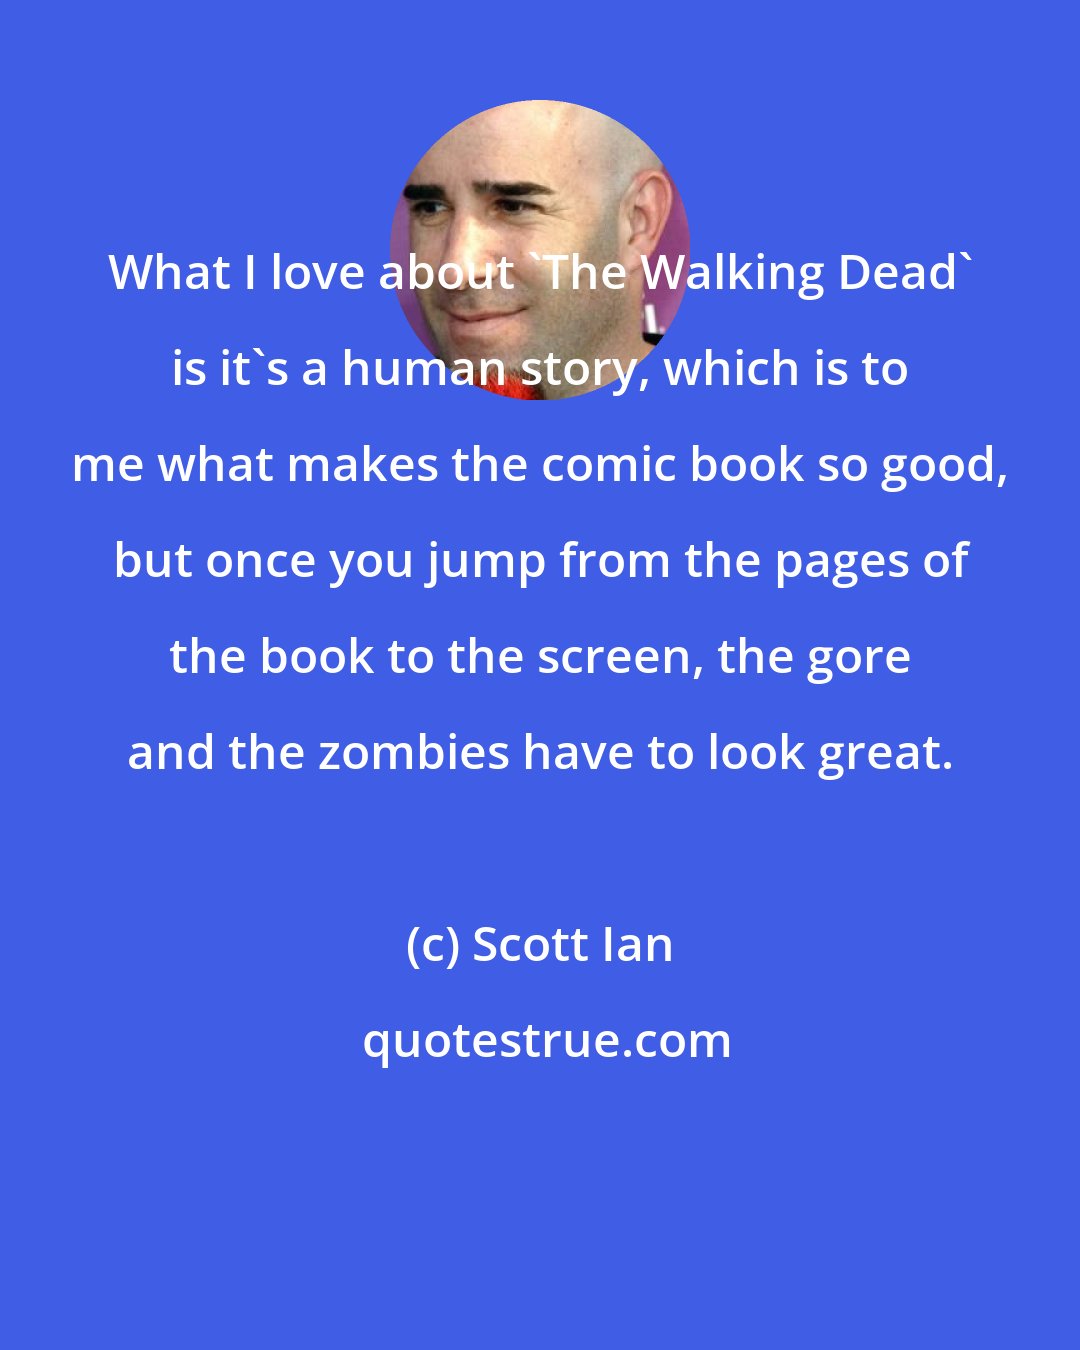 Scott Ian: What I love about 'The Walking Dead' is it's a human story, which is to me what makes the comic book so good, but once you jump from the pages of the book to the screen, the gore and the zombies have to look great.